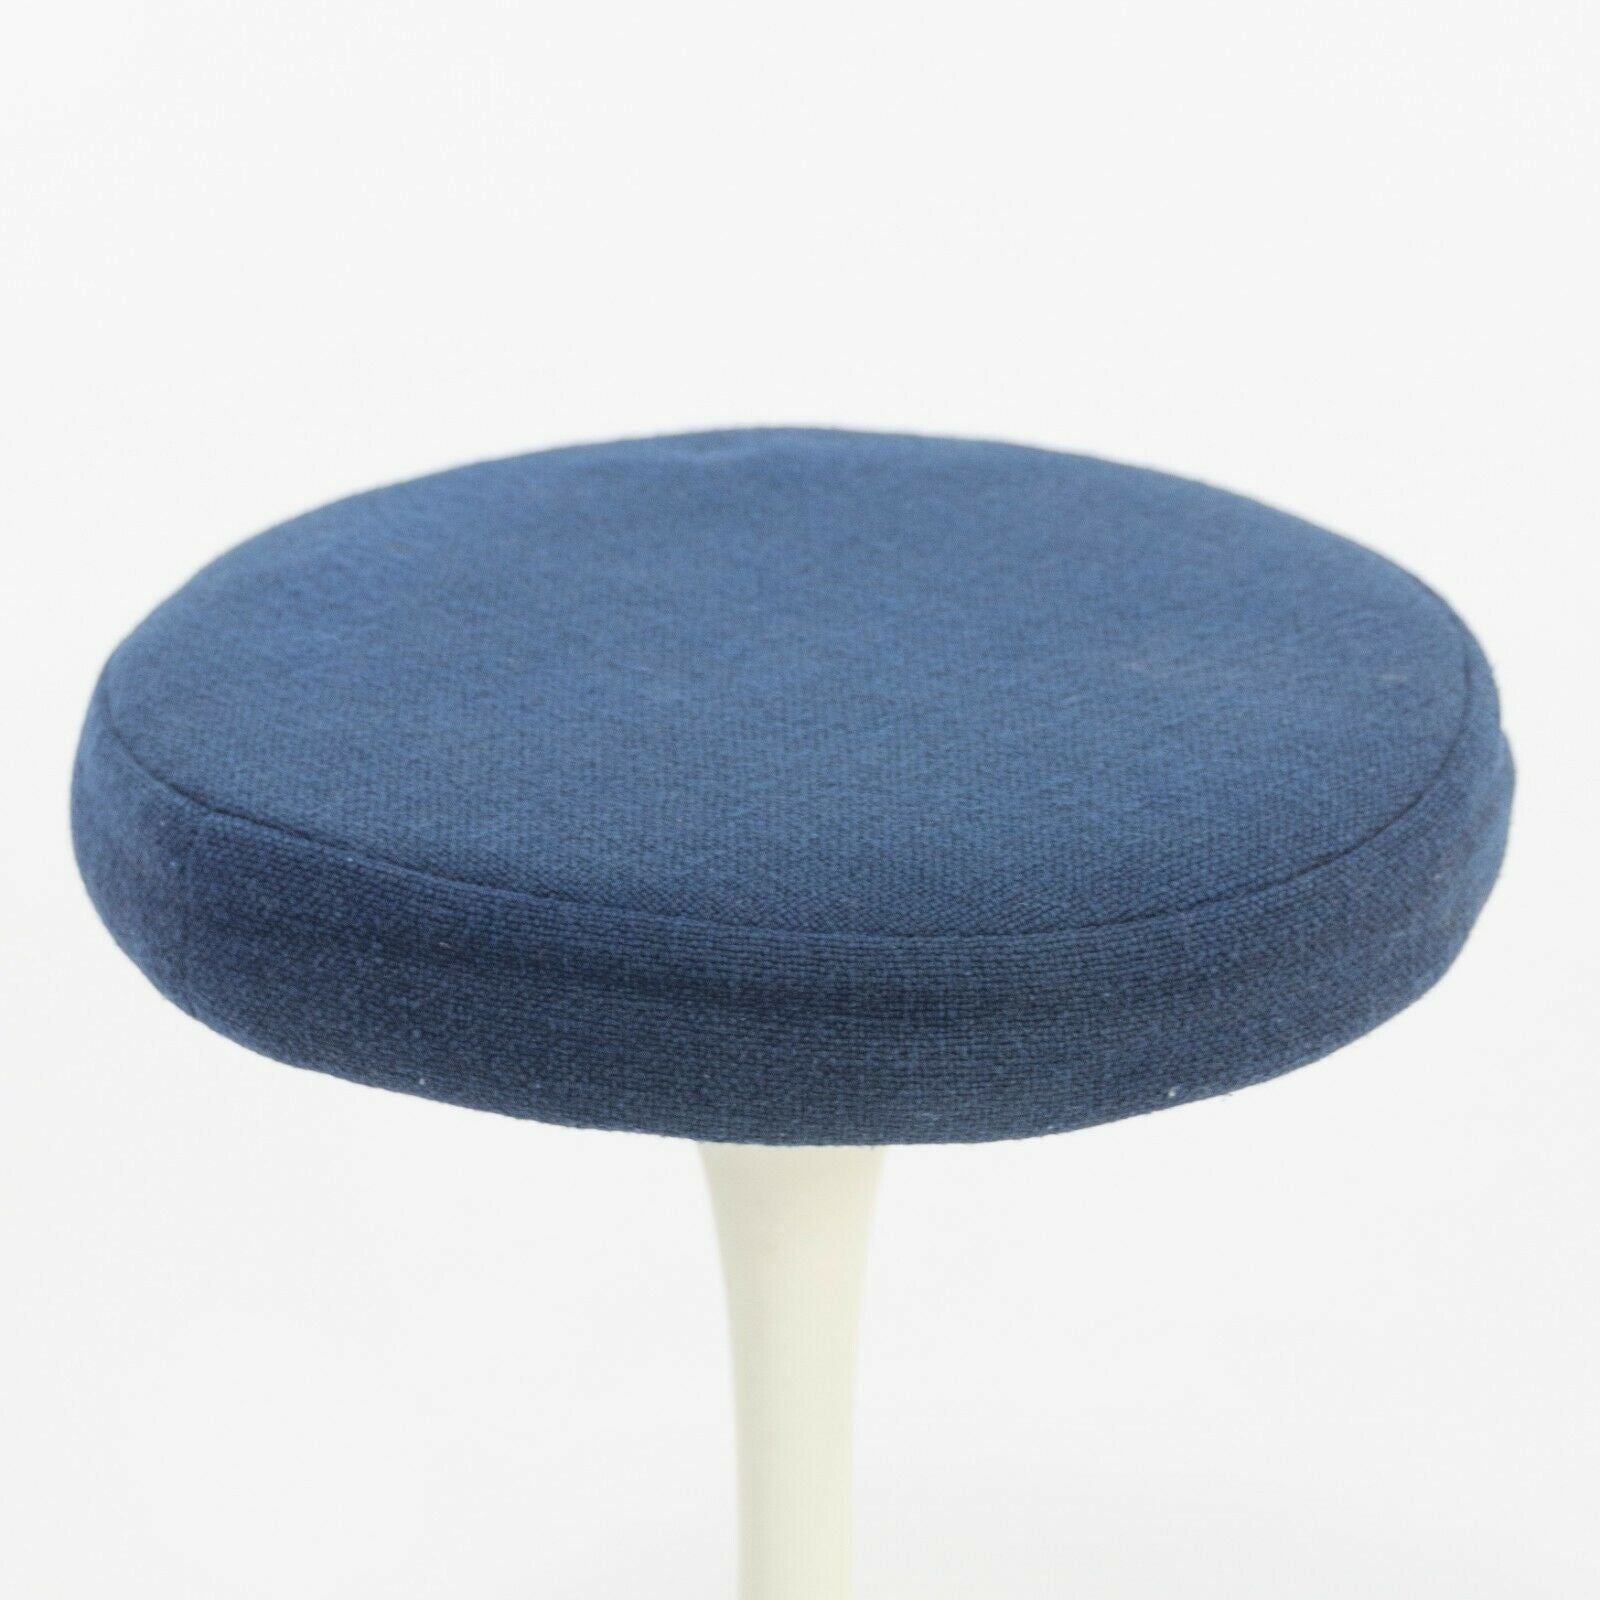 SOLD 1977 Eero Saarinen for Knoll Upholstered Pedestal Tulip Stools 152 S 2x Available